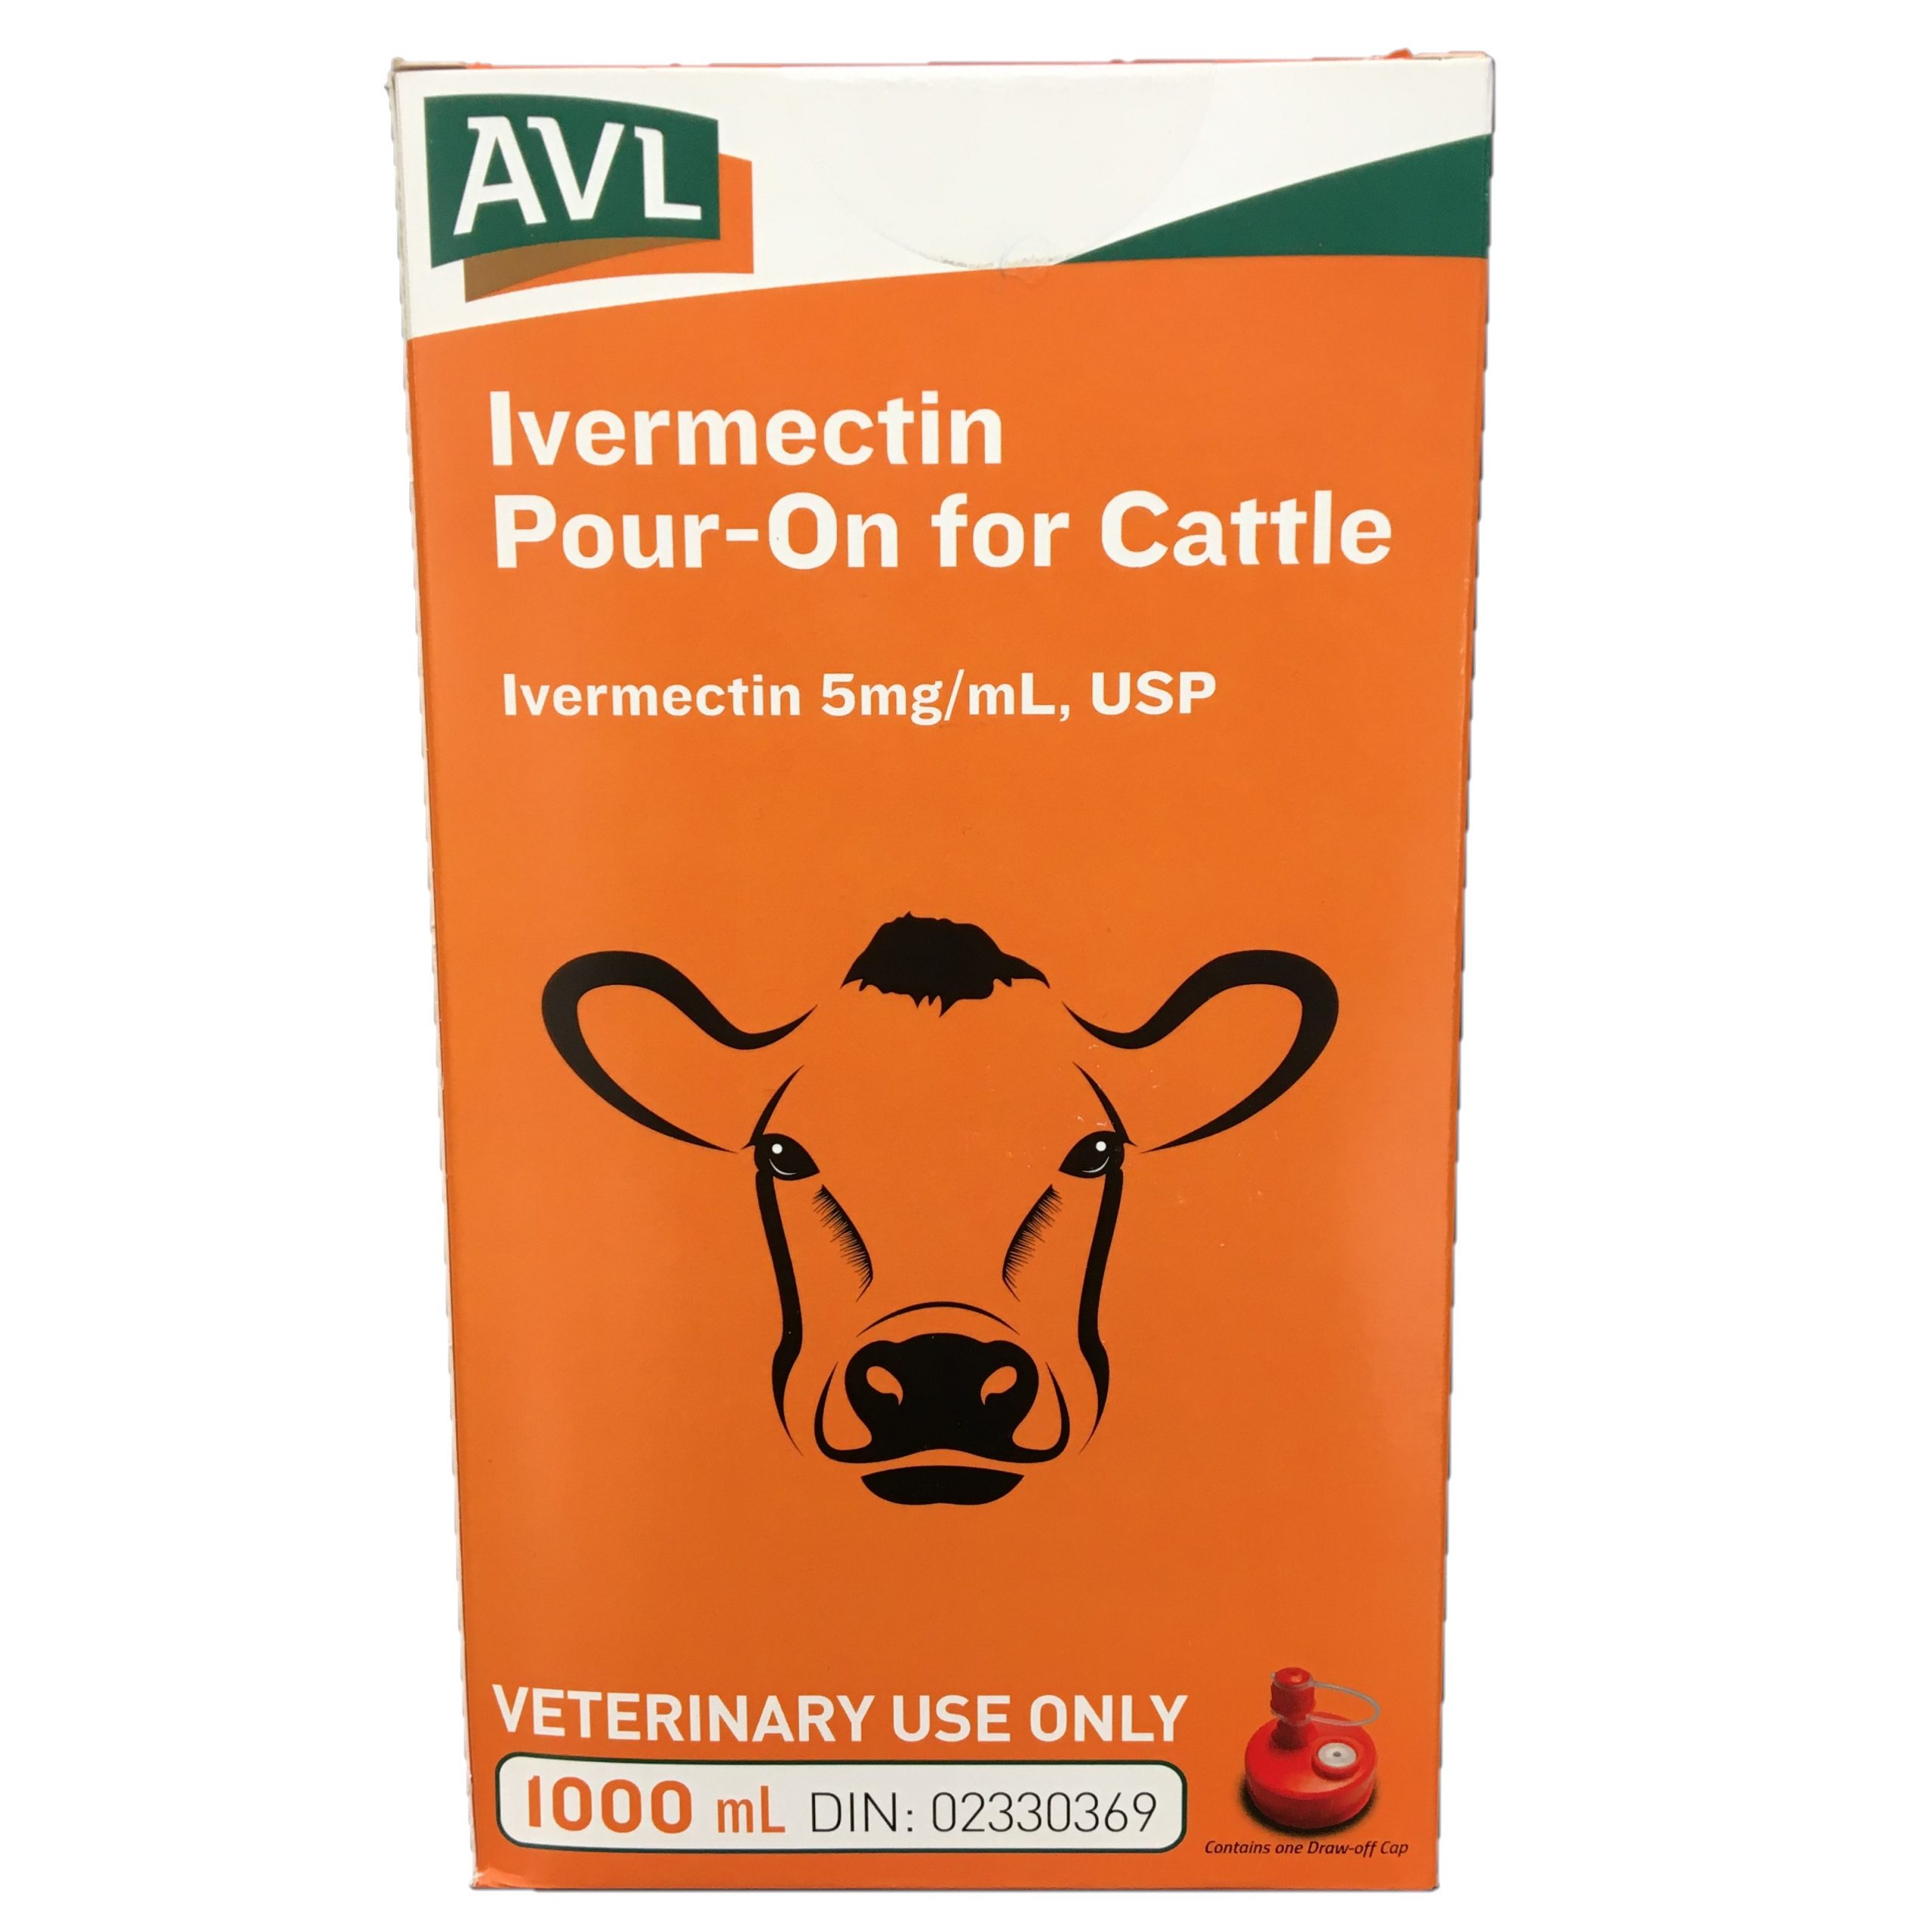 AVL Ivermectin – Pour-On for Cattle